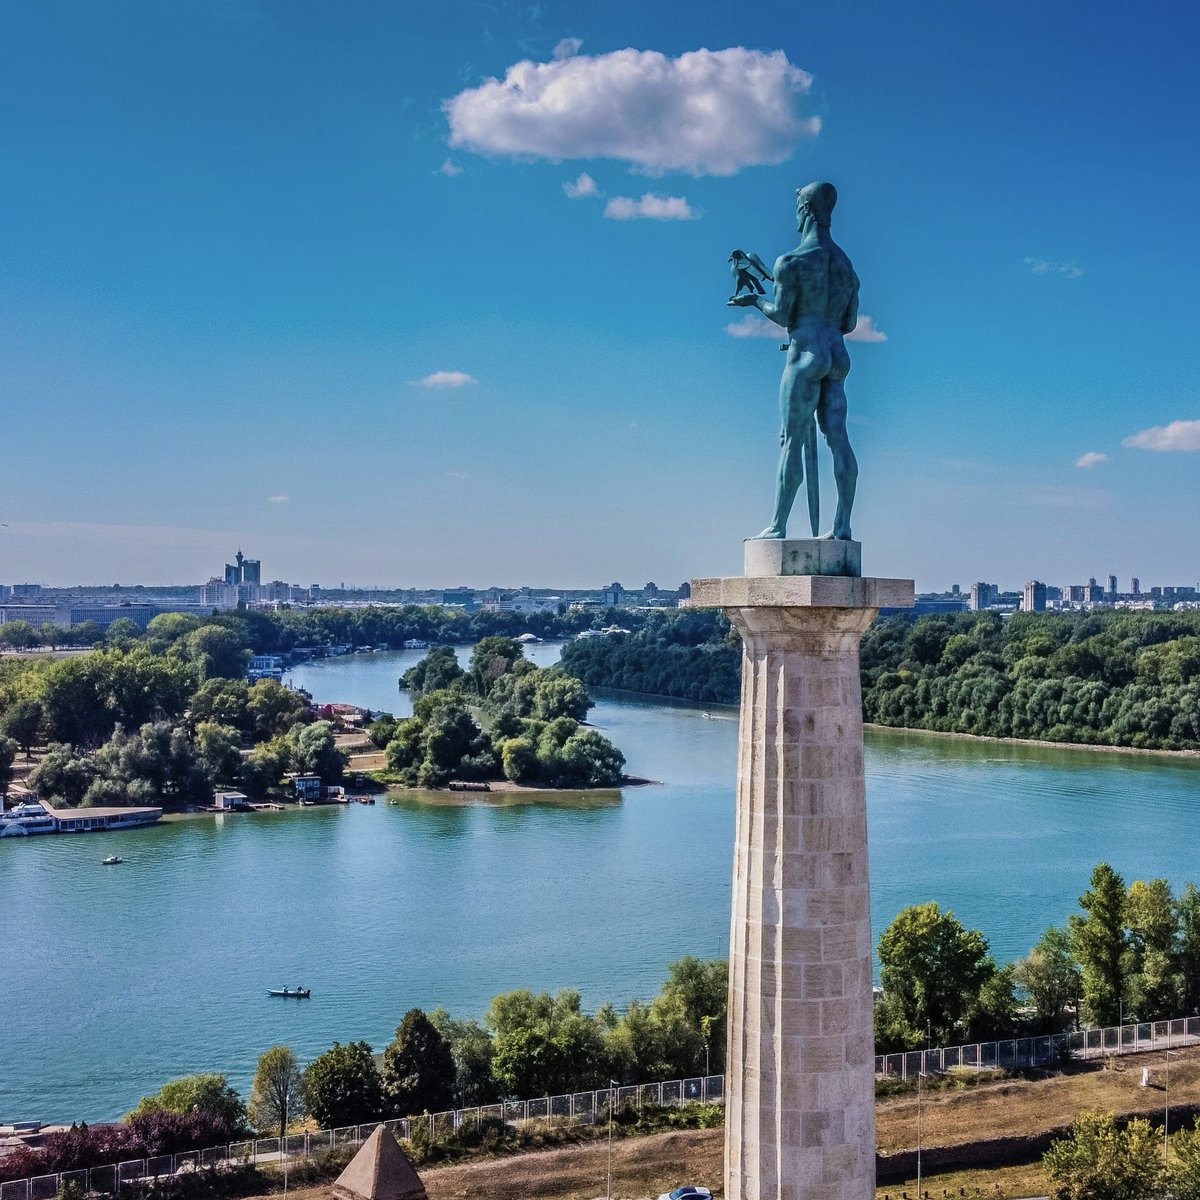 Experience, from April 16 to 19, the Days of Belgrade, a manifestation that, through an exciting program every April, recalling all the peculiarities, beauties, and great people who have made Belgrade what it is today.
#experienceSerbia #visitbelgrade
📷 Dimitrije Milenković